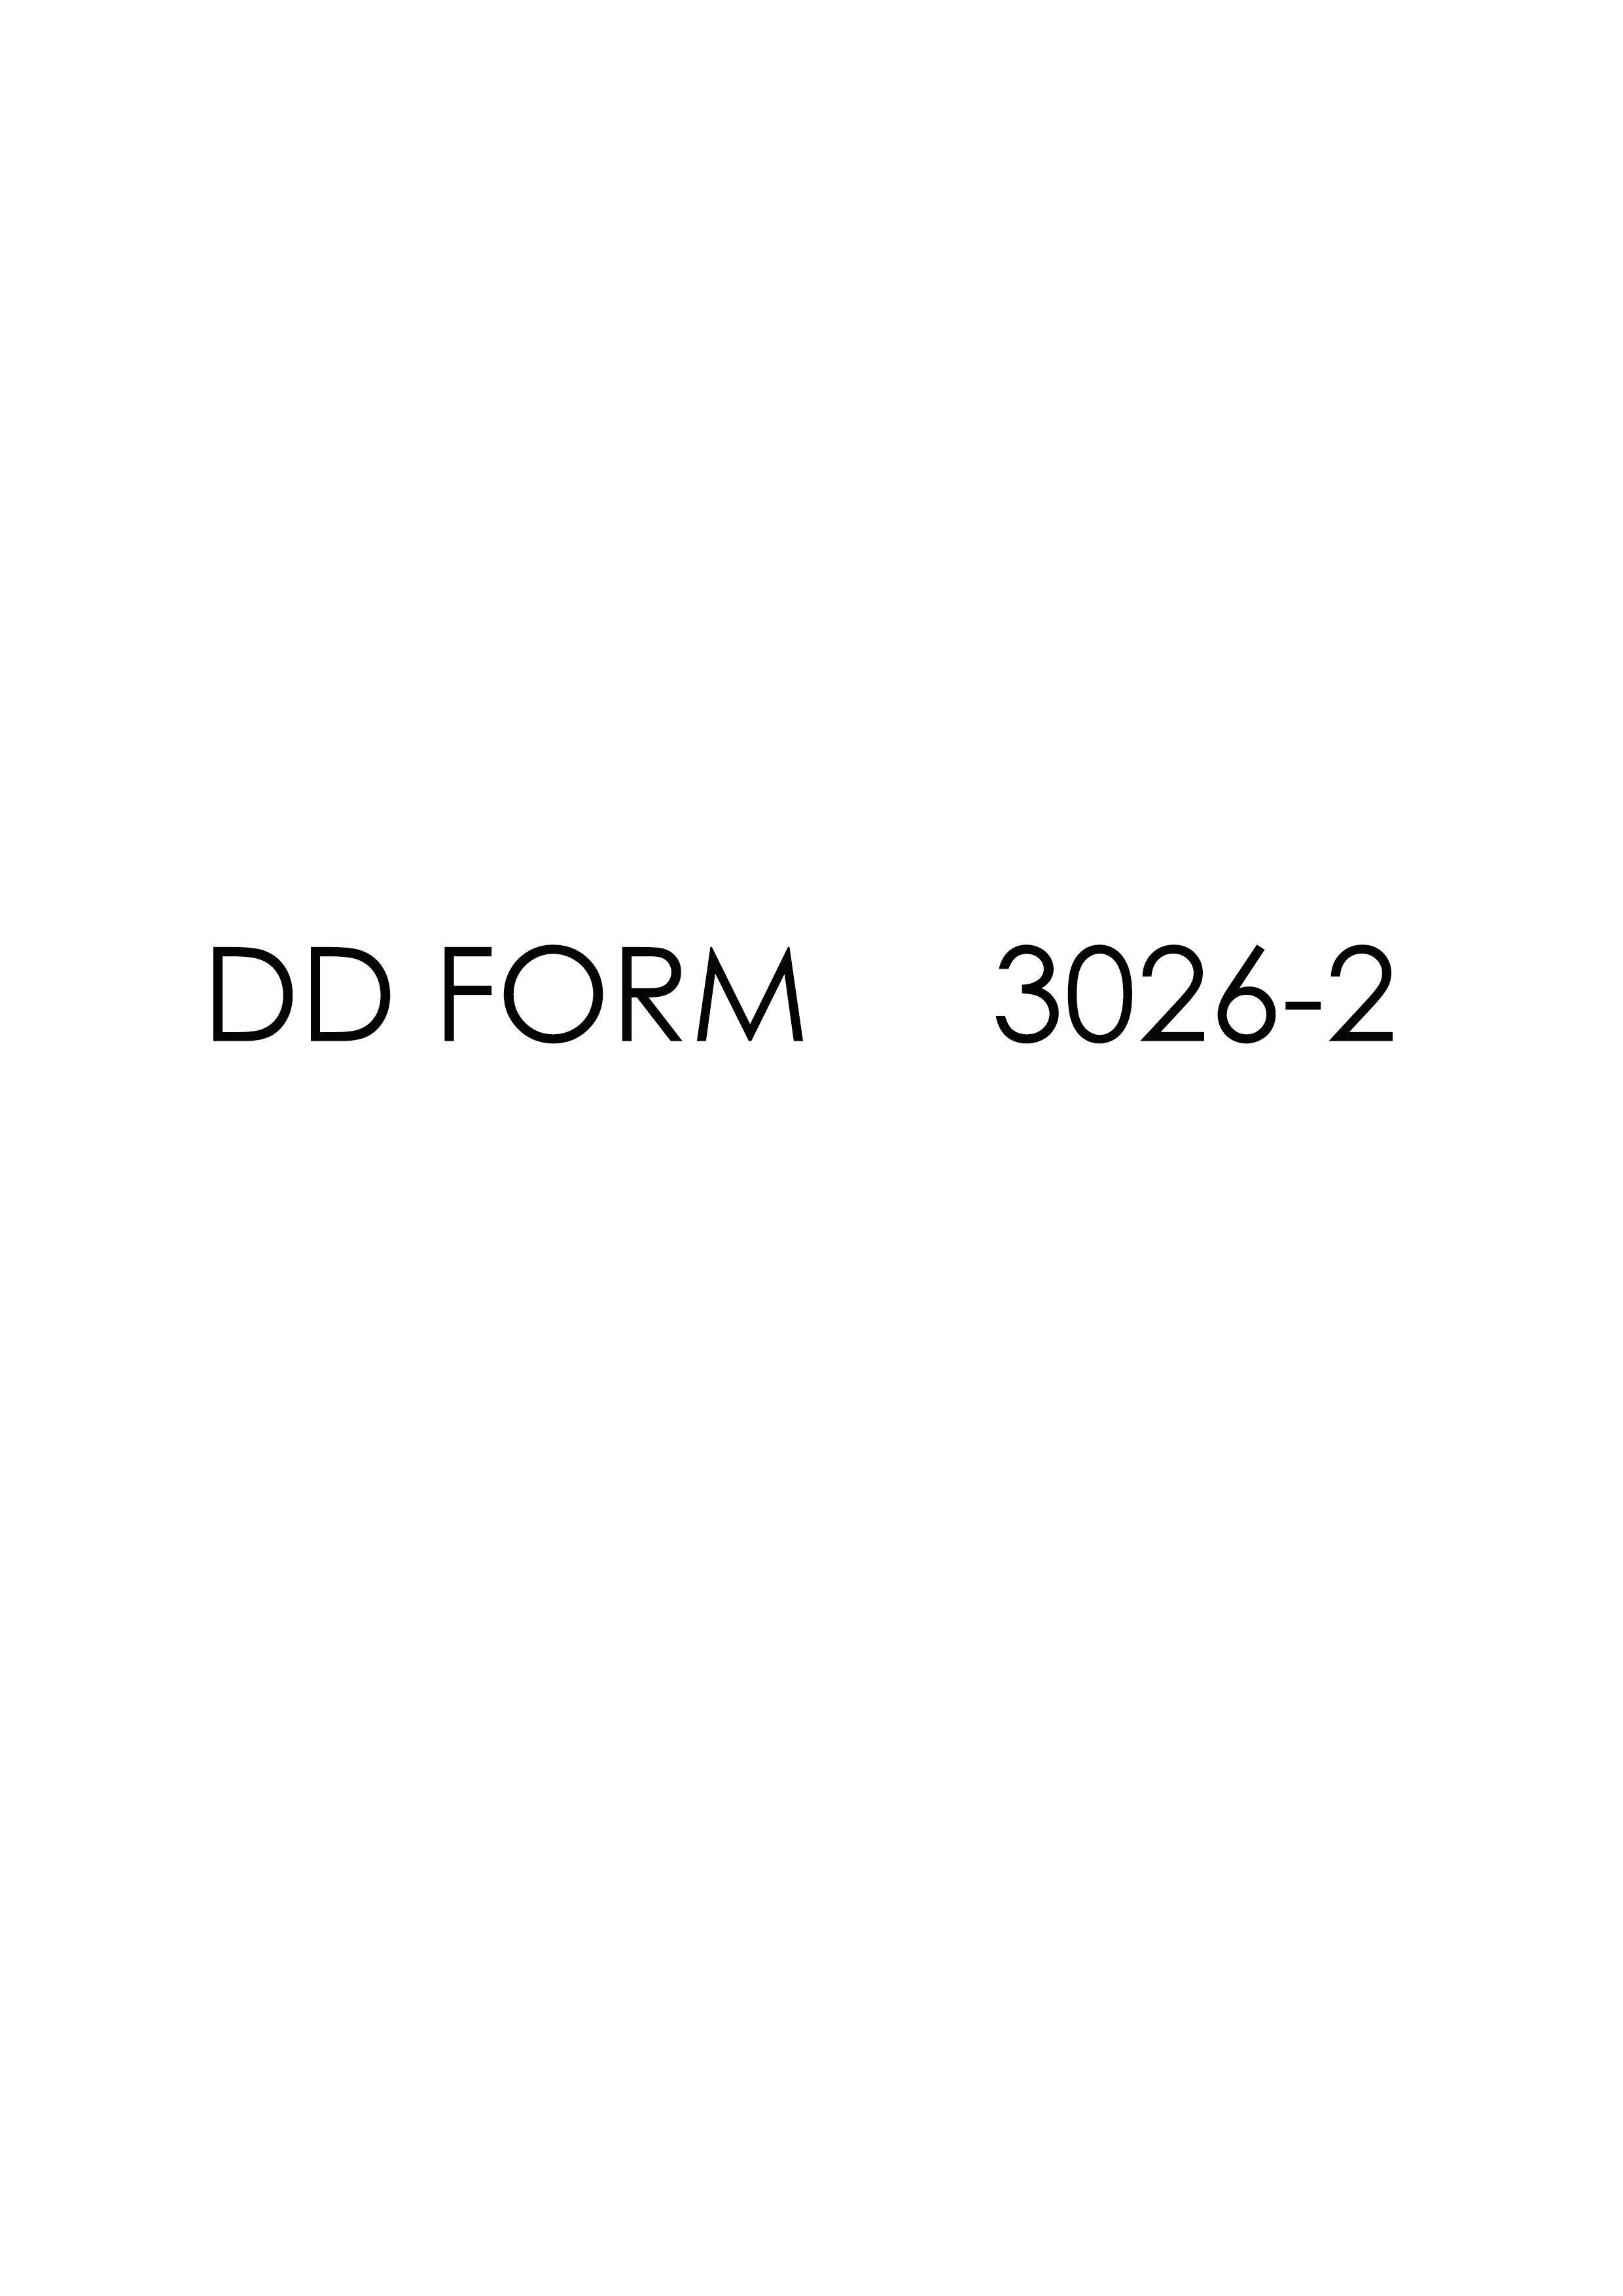 Download Fillable dd Form 3026-2